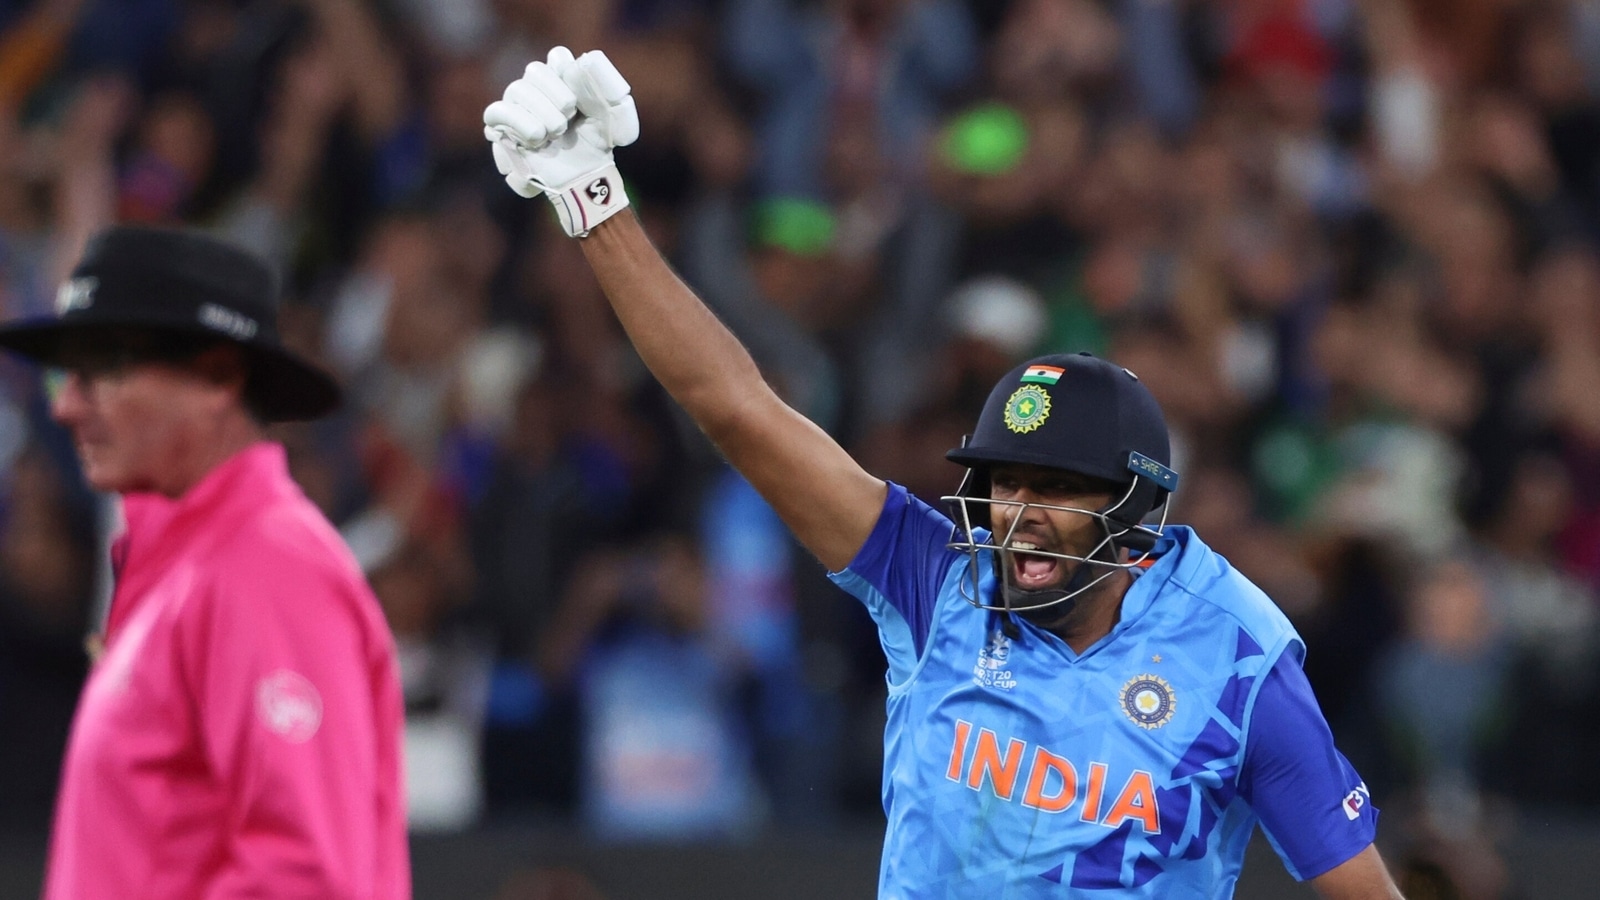 i-cursed-dinesh-karthik-when-i-walked-in-to-bat-vs-pakistan-ashwin-recalls-last-over-heroics-in-t20-world-cup